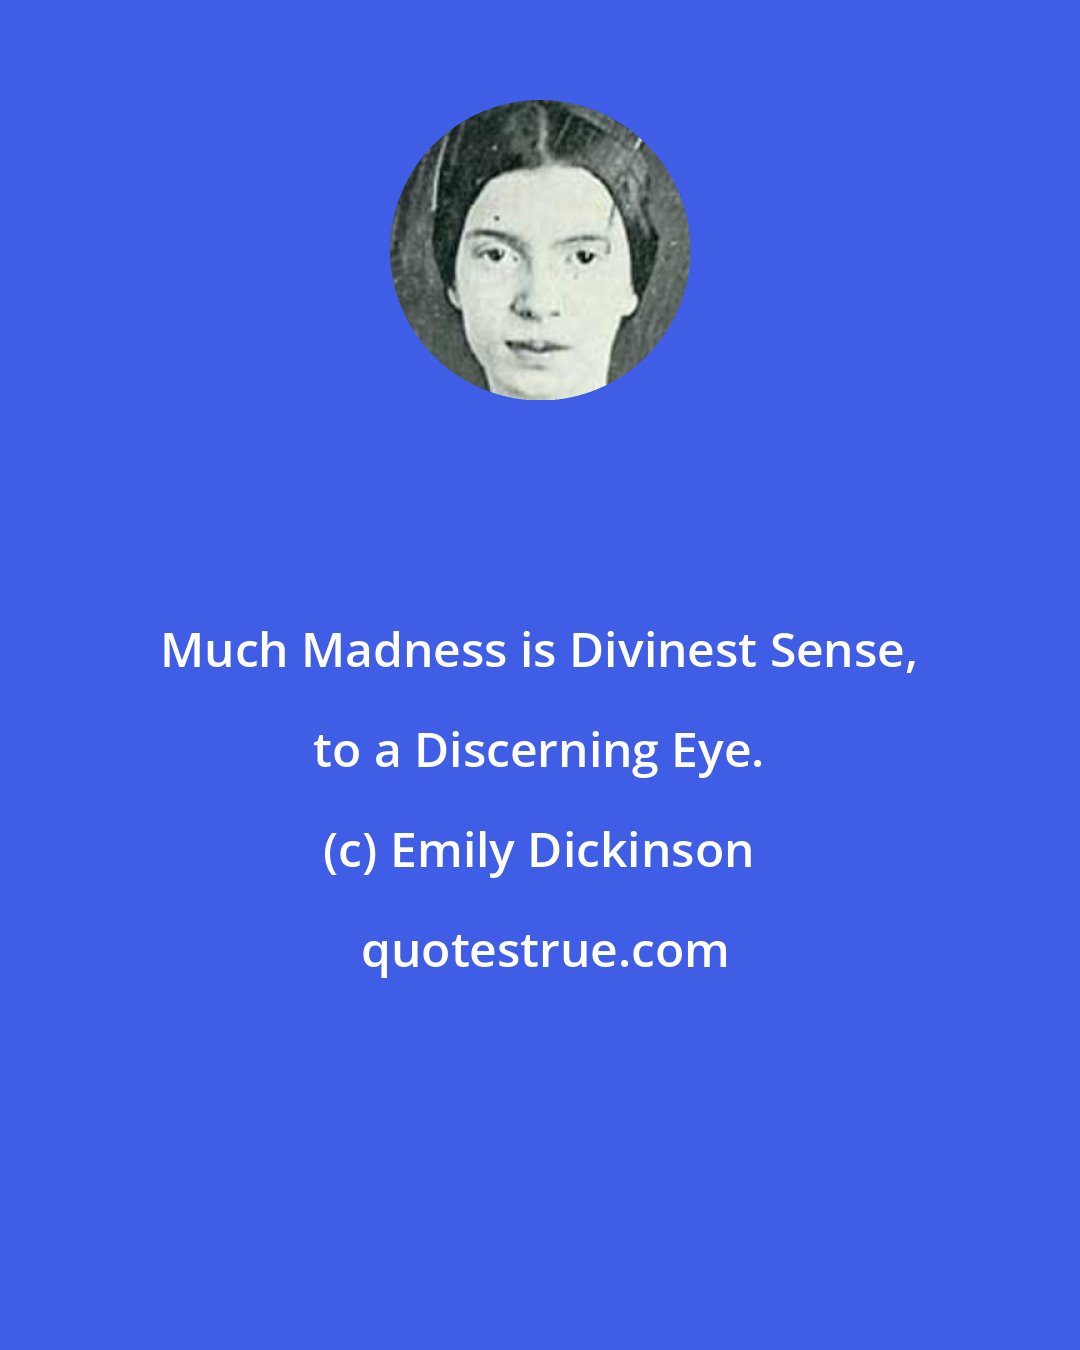 Emily Dickinson: Much Madness is Divinest Sense, to a Discerning Eye.